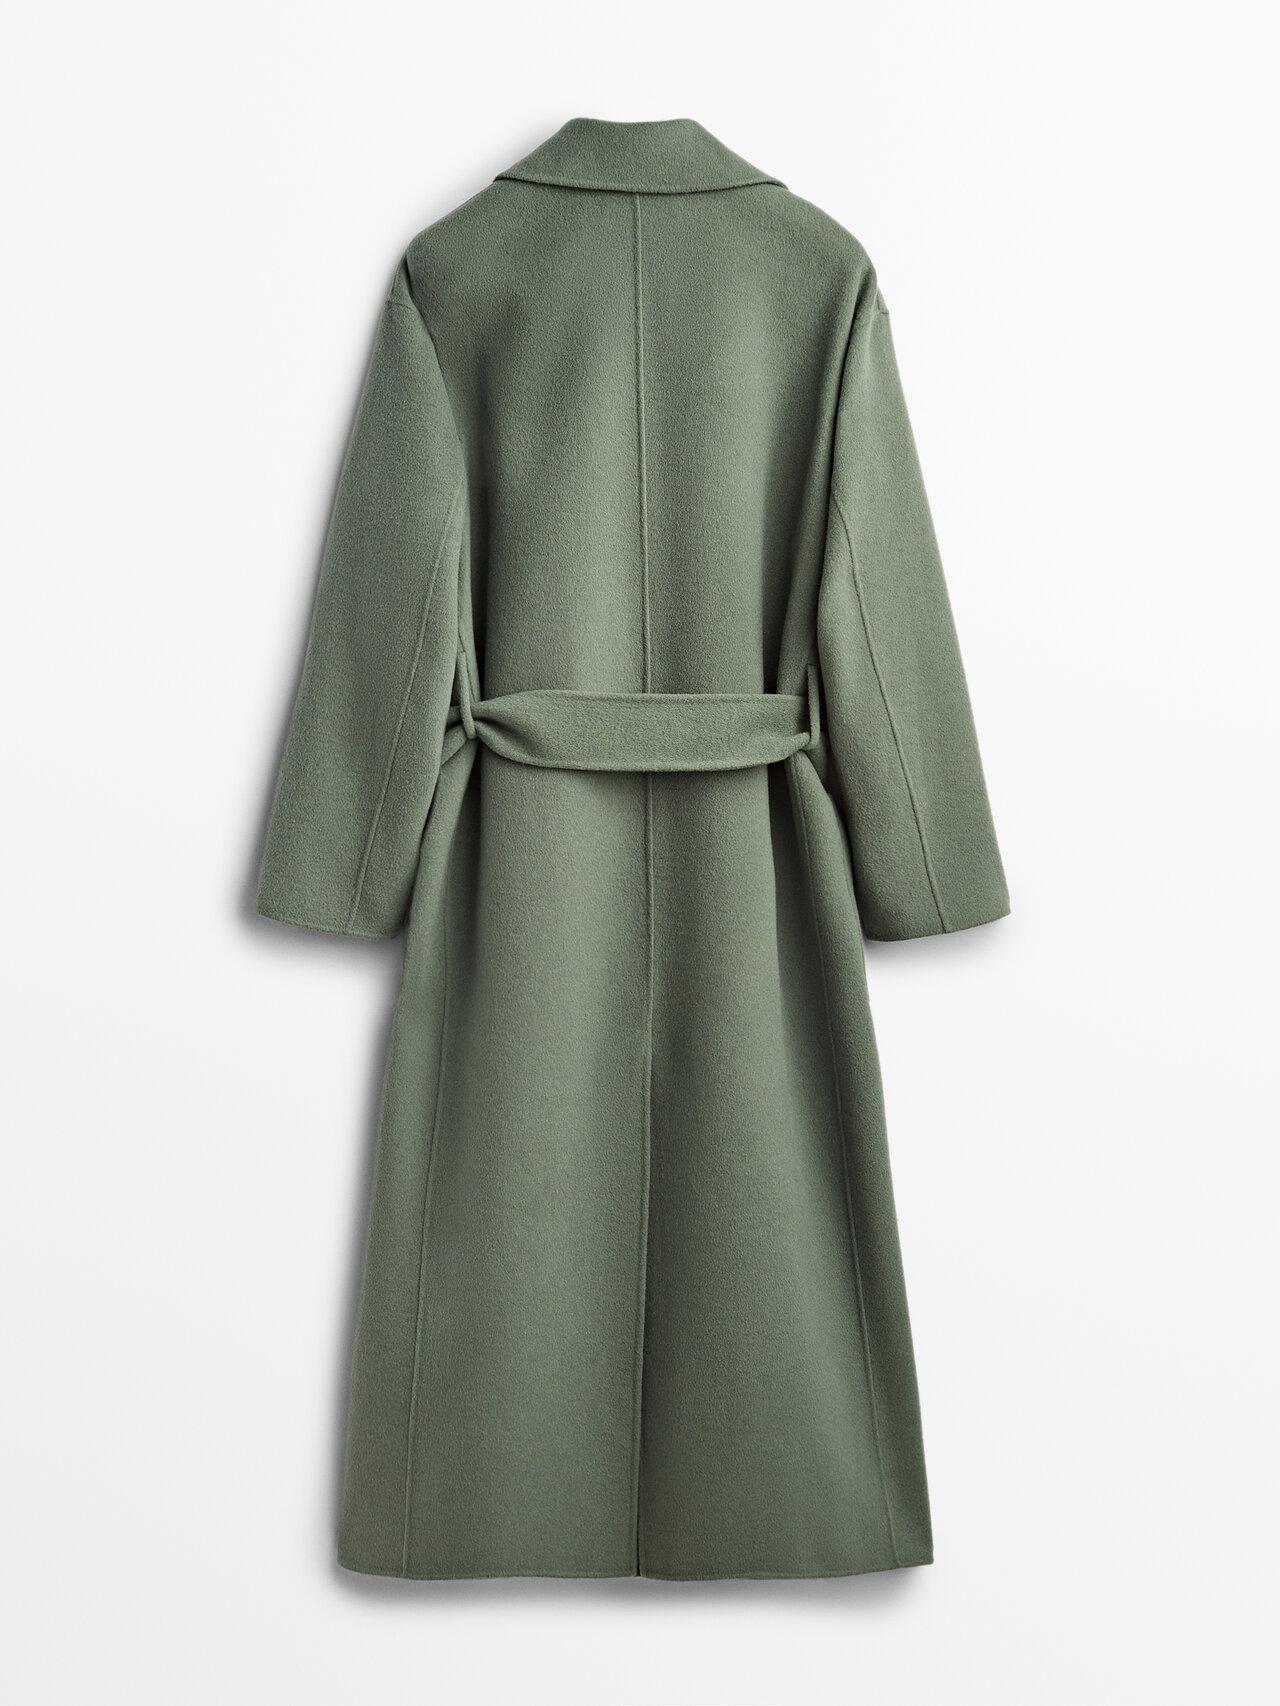 MASSIMO DUTTI Wool Wraparound Coat With Belt in Green | Lyst